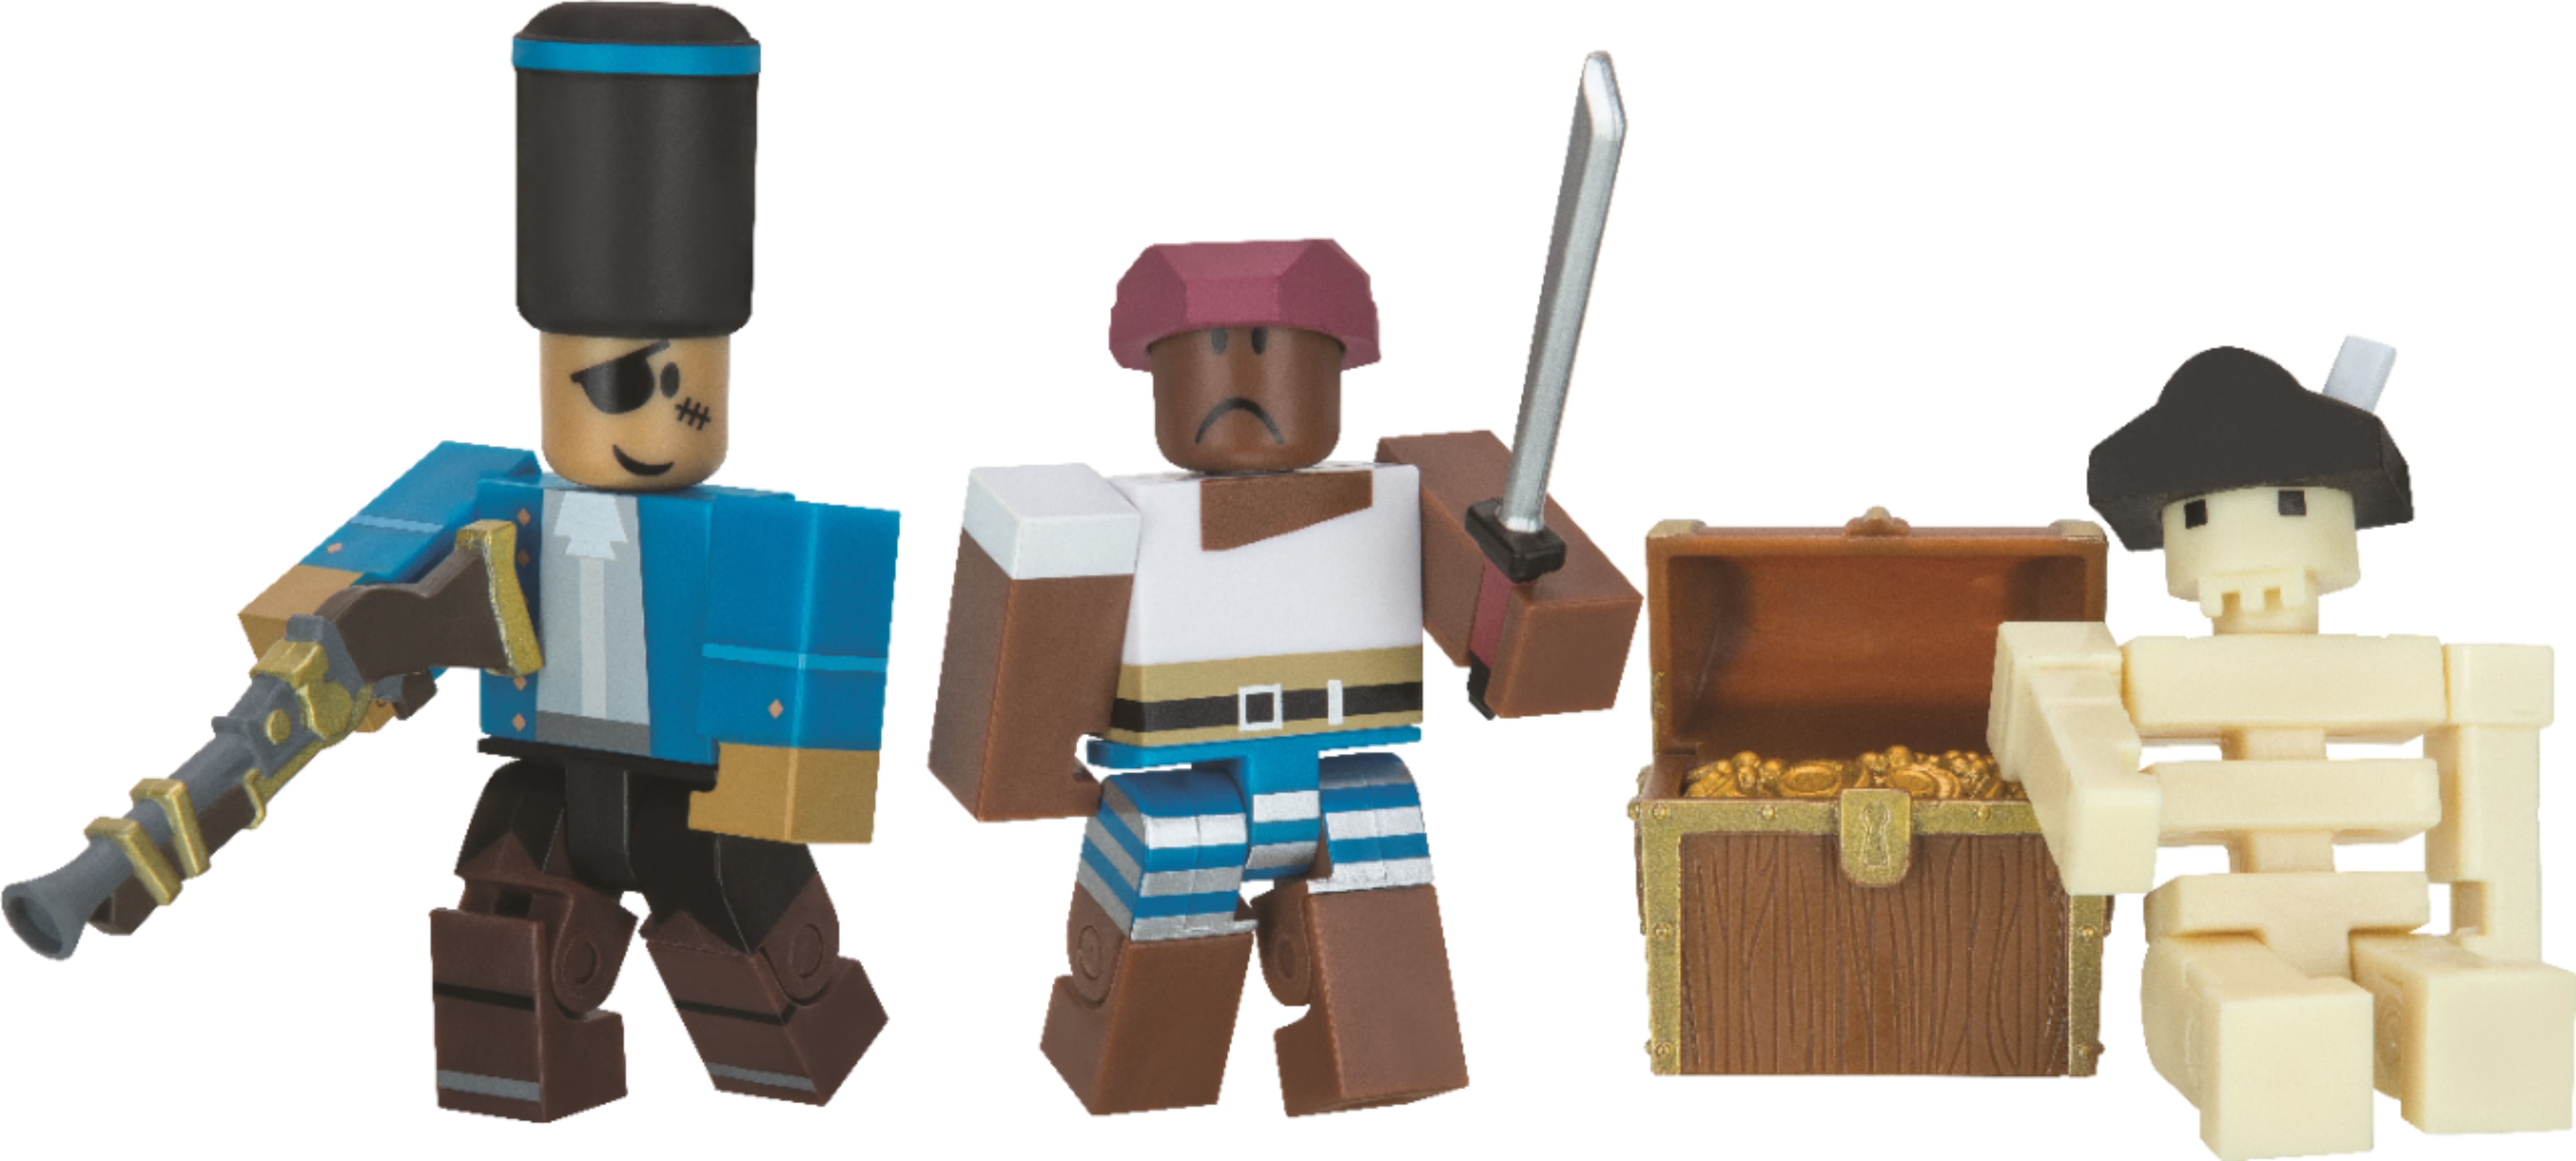 Roblox Game Pack Styles May Vary Rob0313 Best Buy